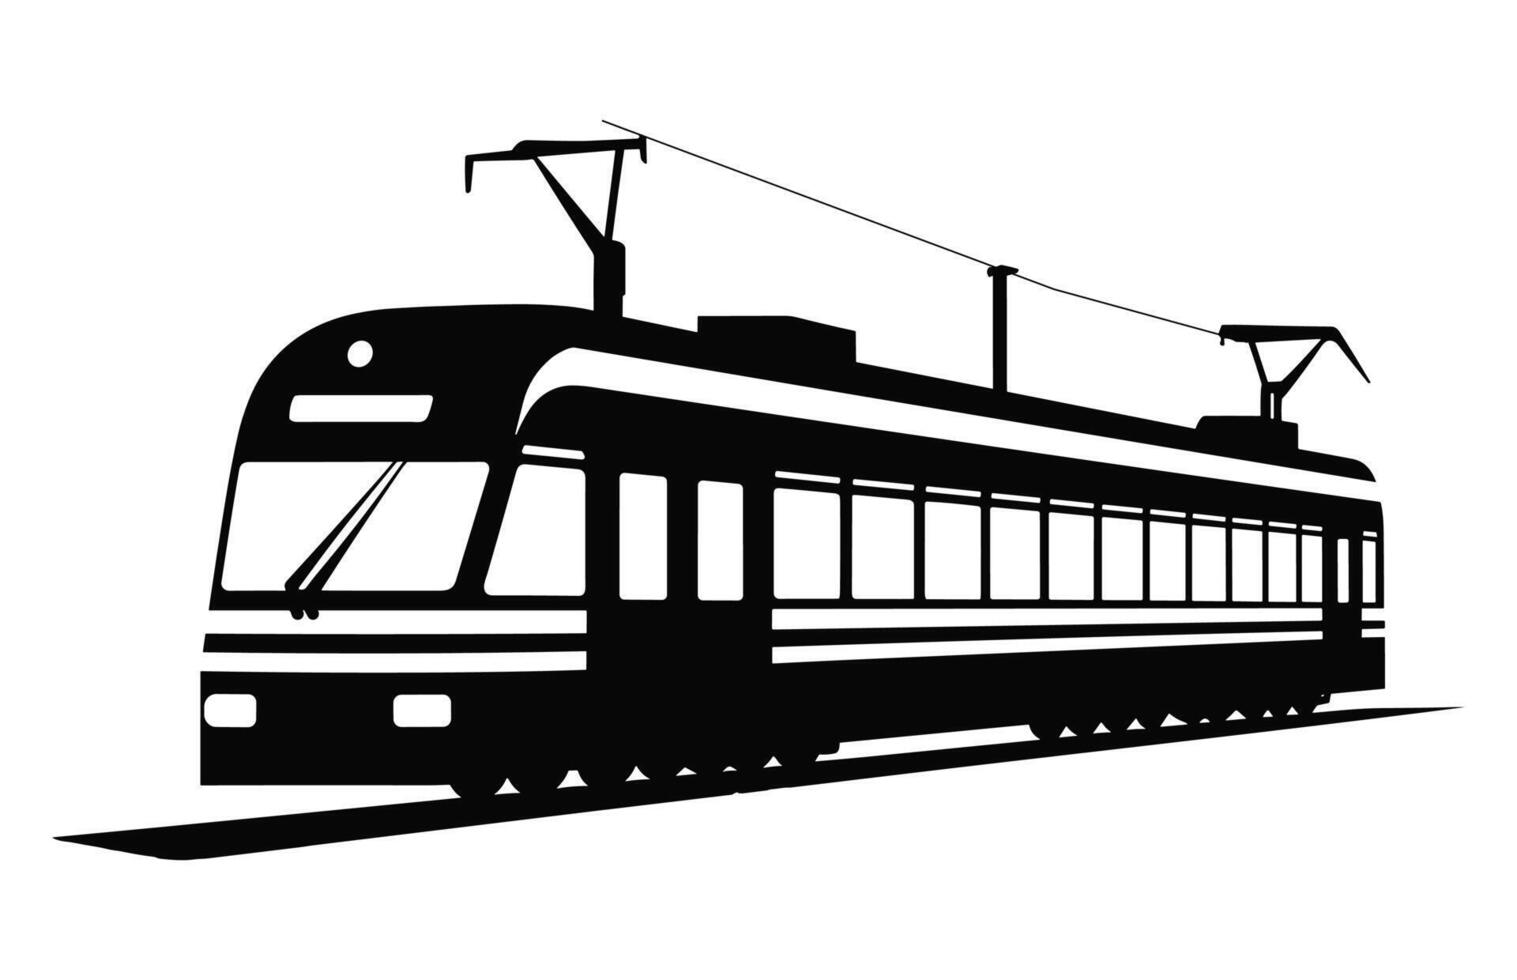 Tram Silhouette vector isolated on a white background, Cable Tram vehicle black silhouette